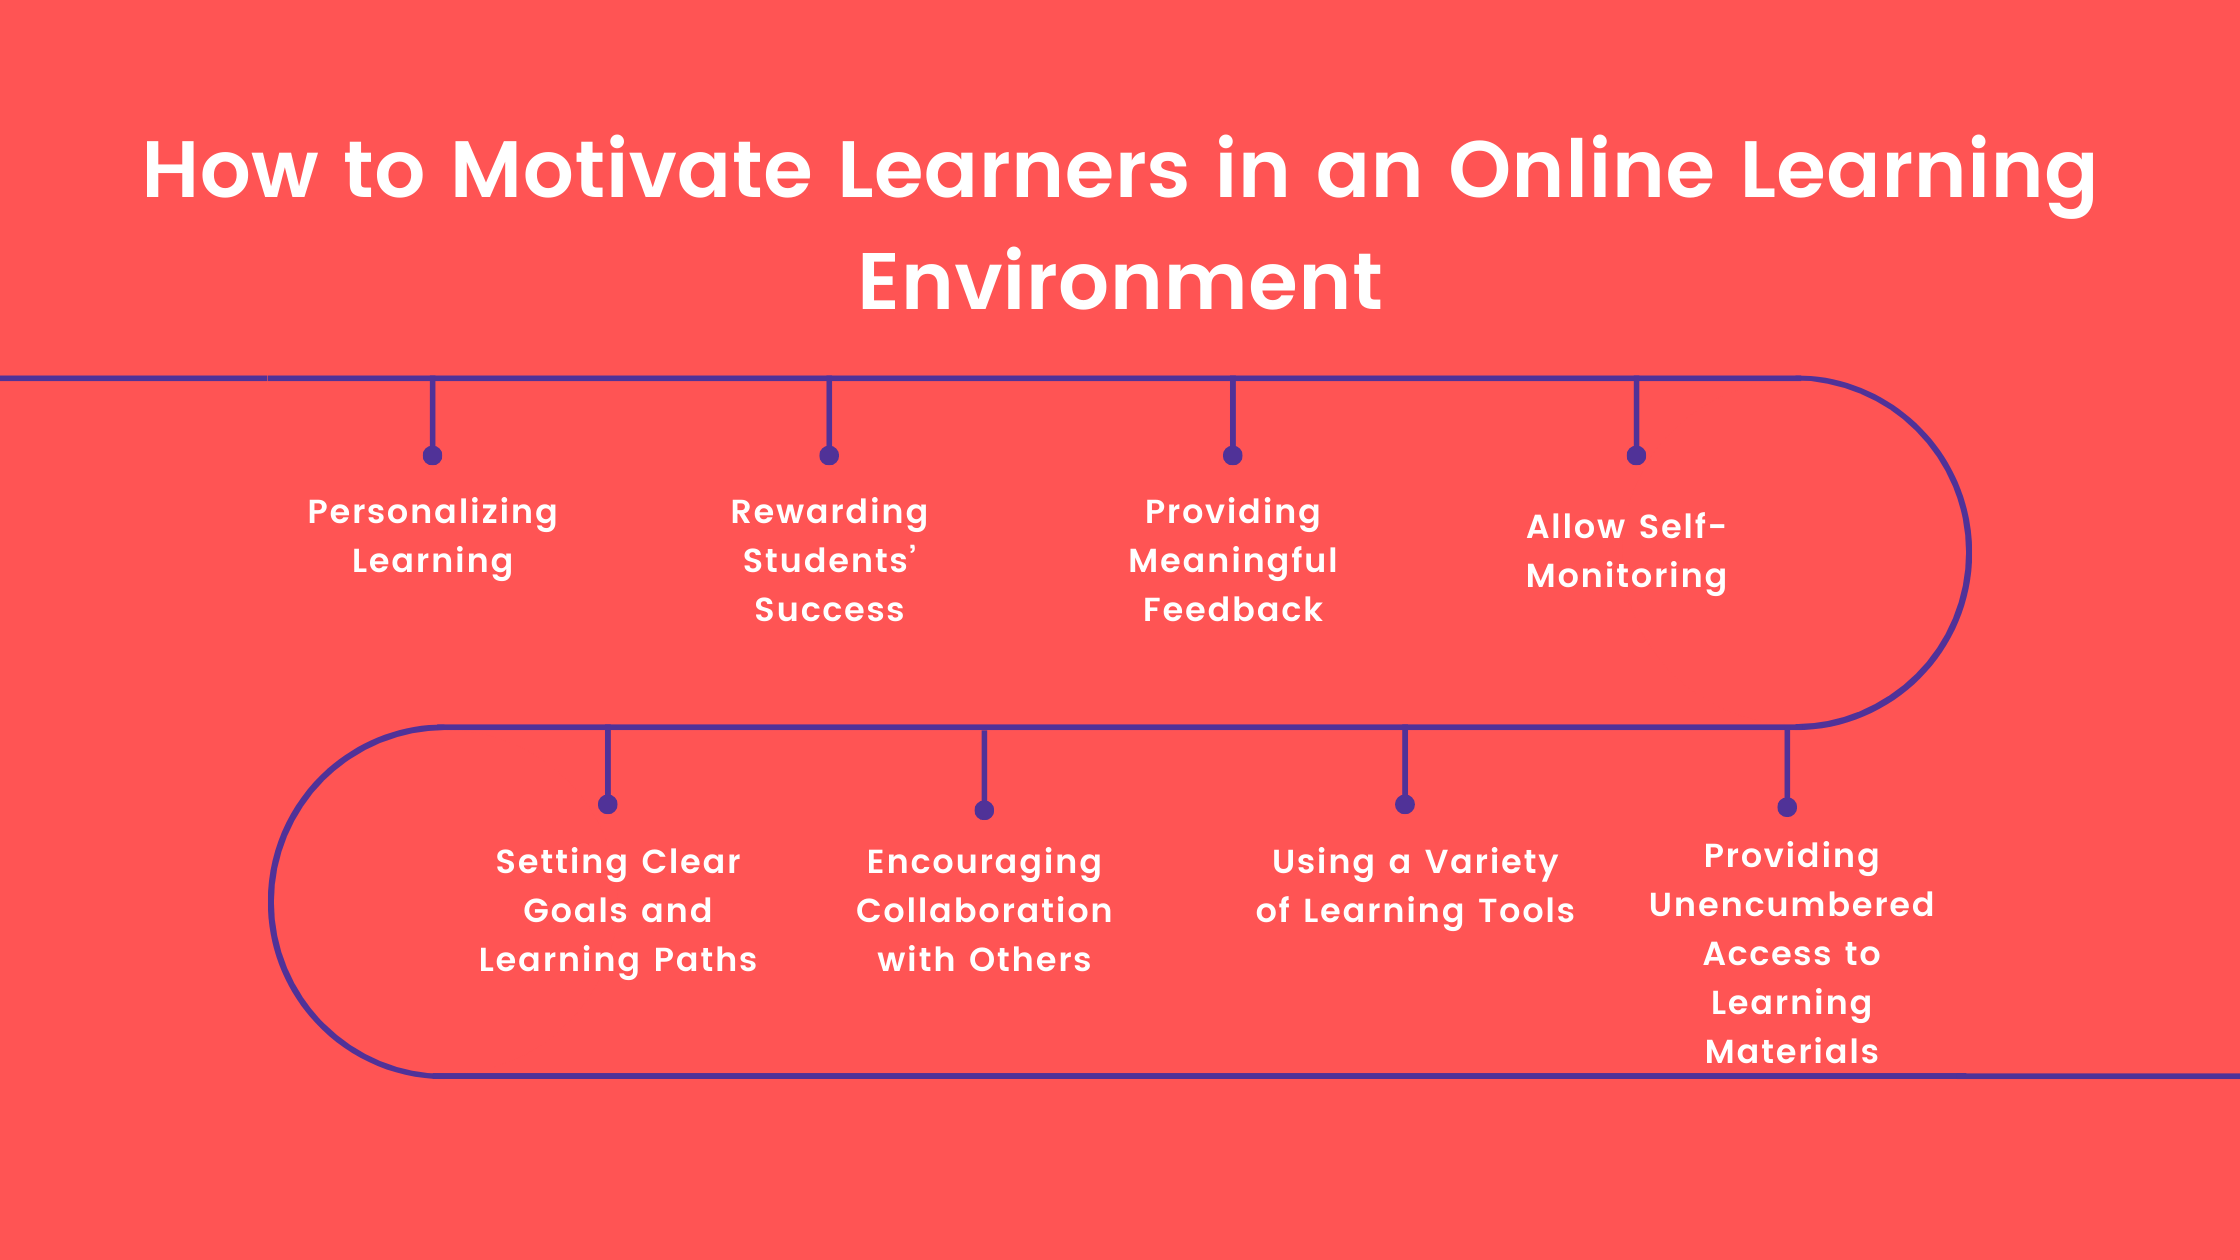 9 Tips on Creating a Positive Online Learning Environment - Brookes Blog